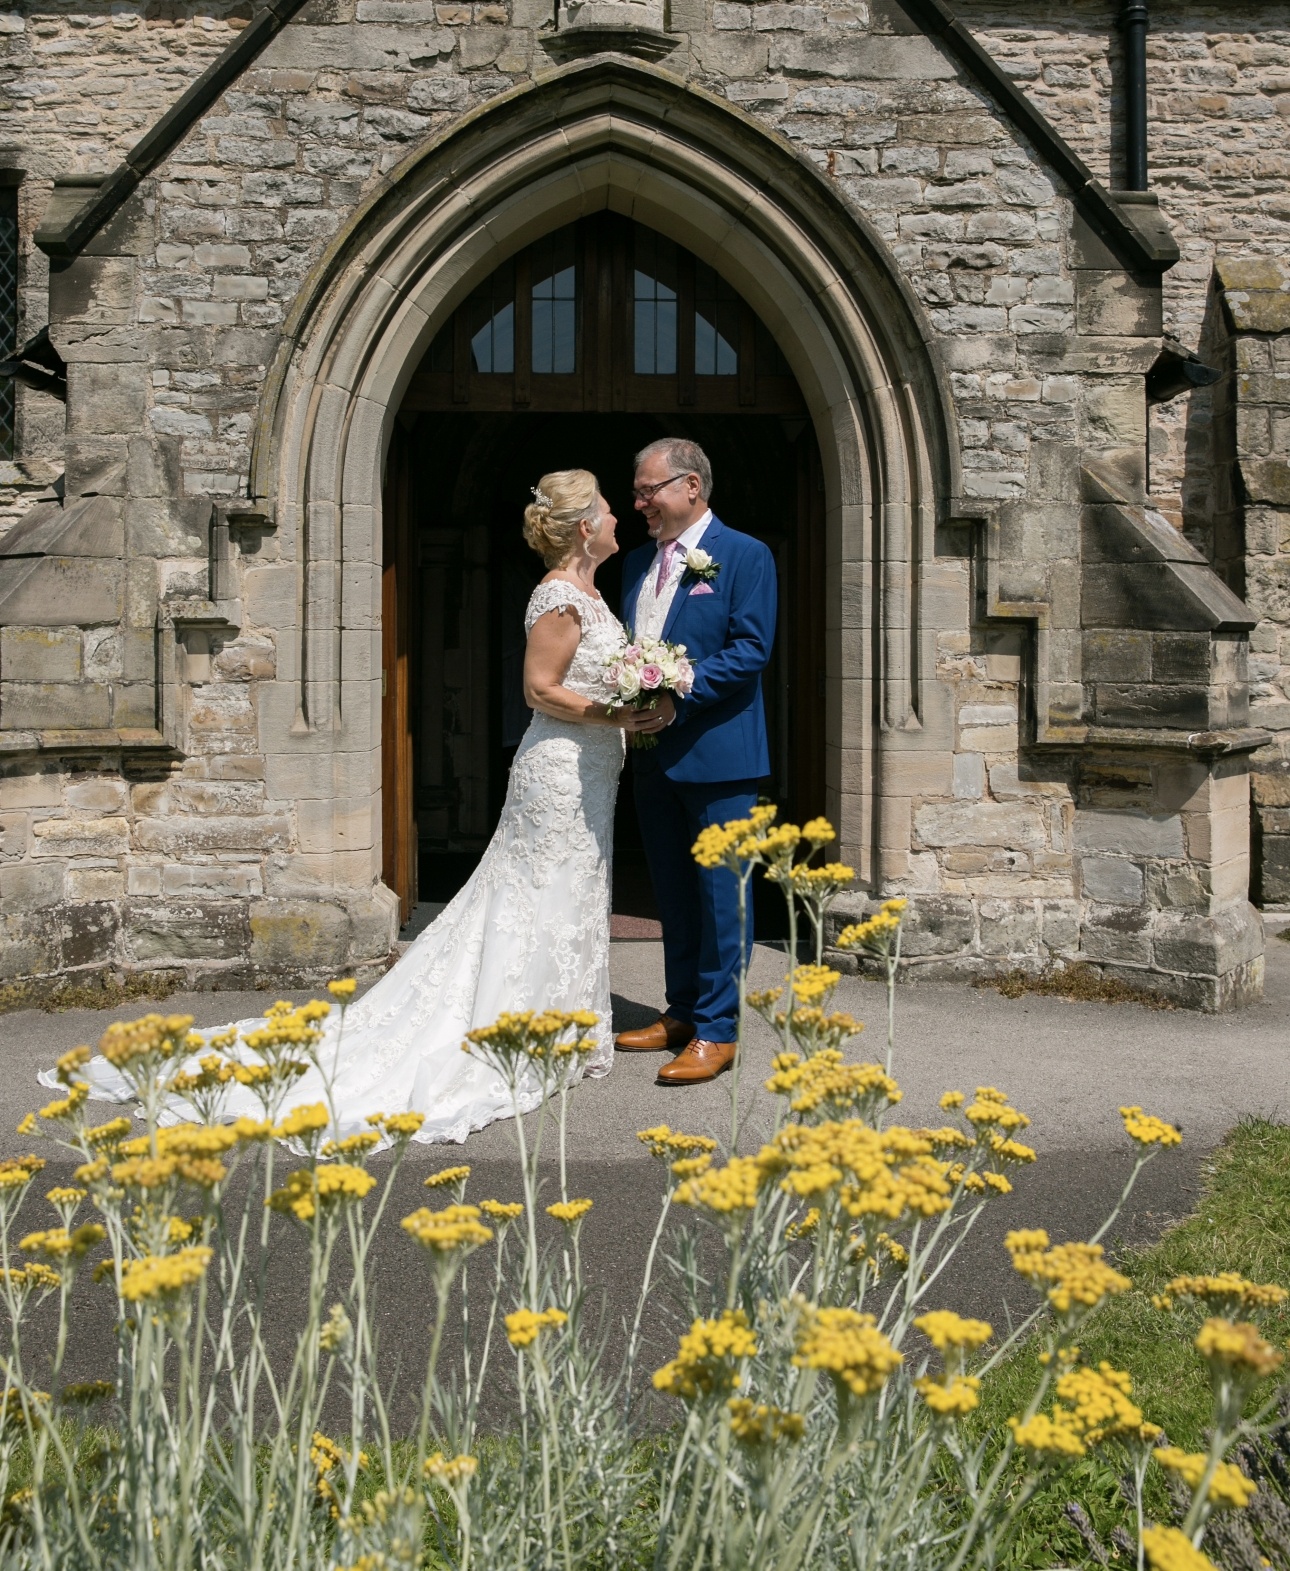 Couple infront of church